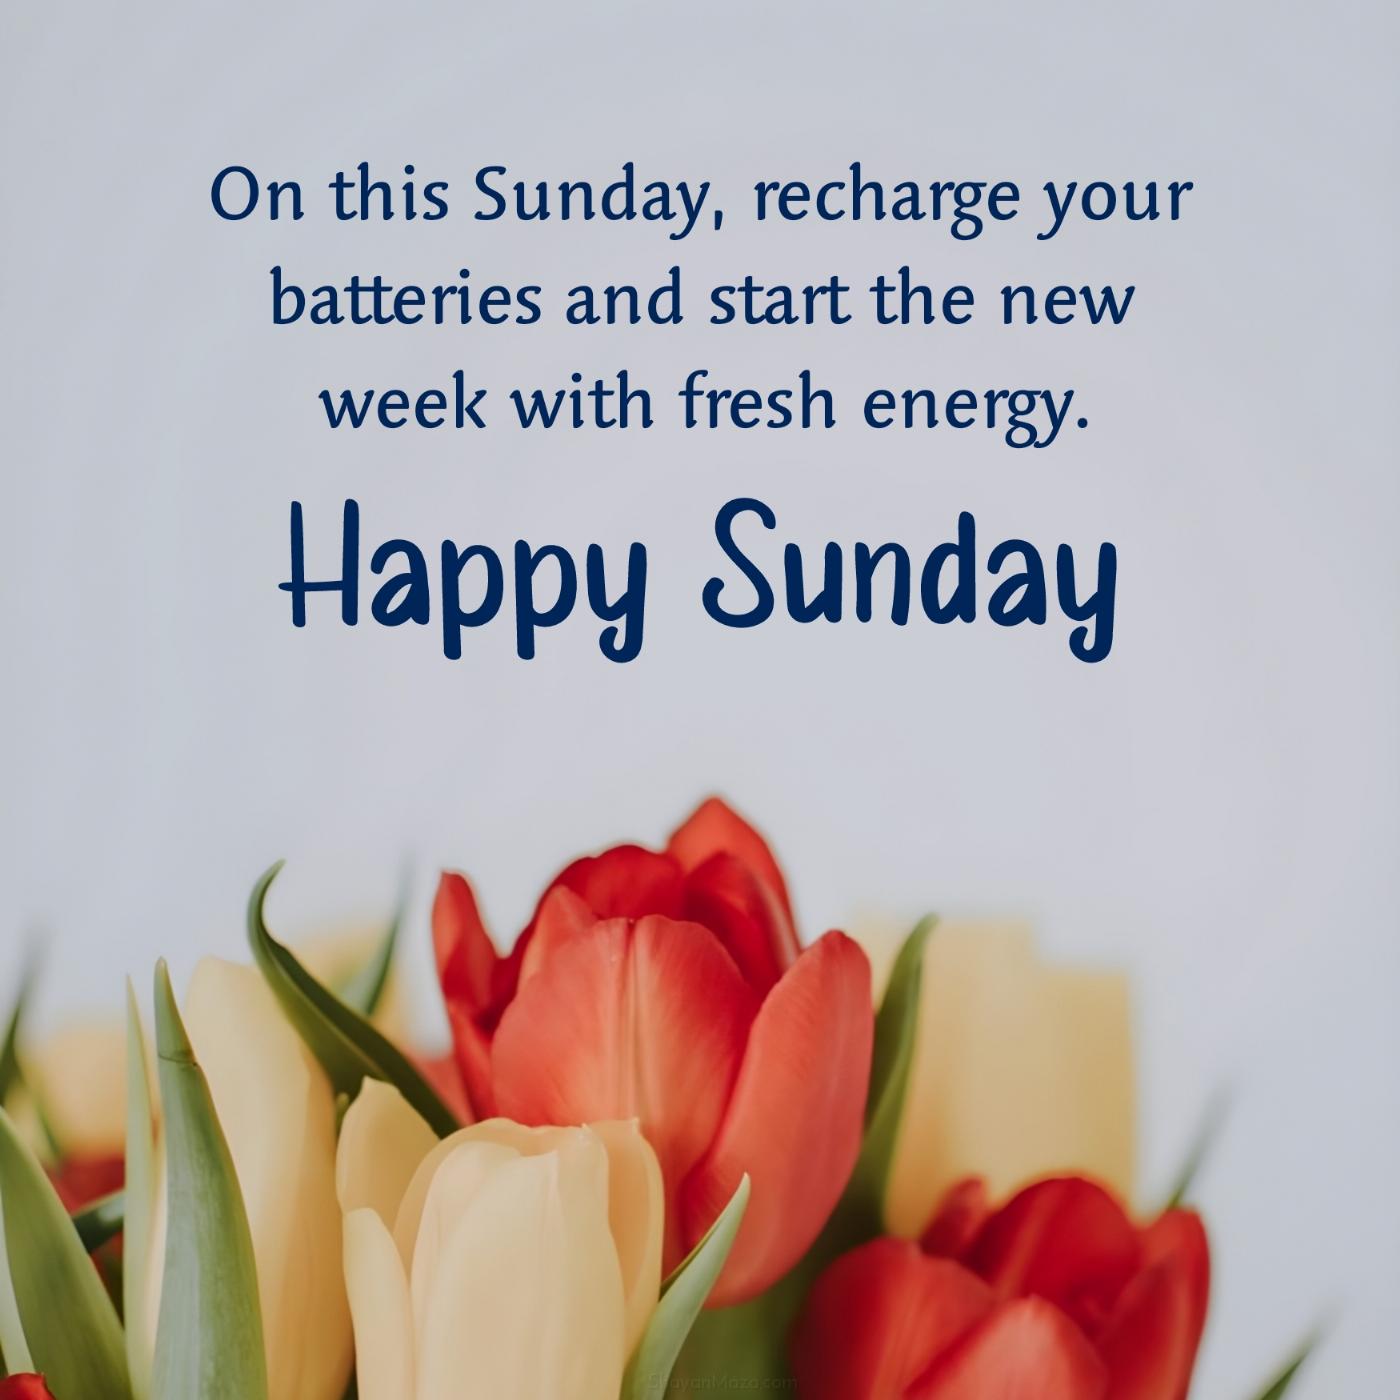 On this Sunday recharge your batteries and start the new week